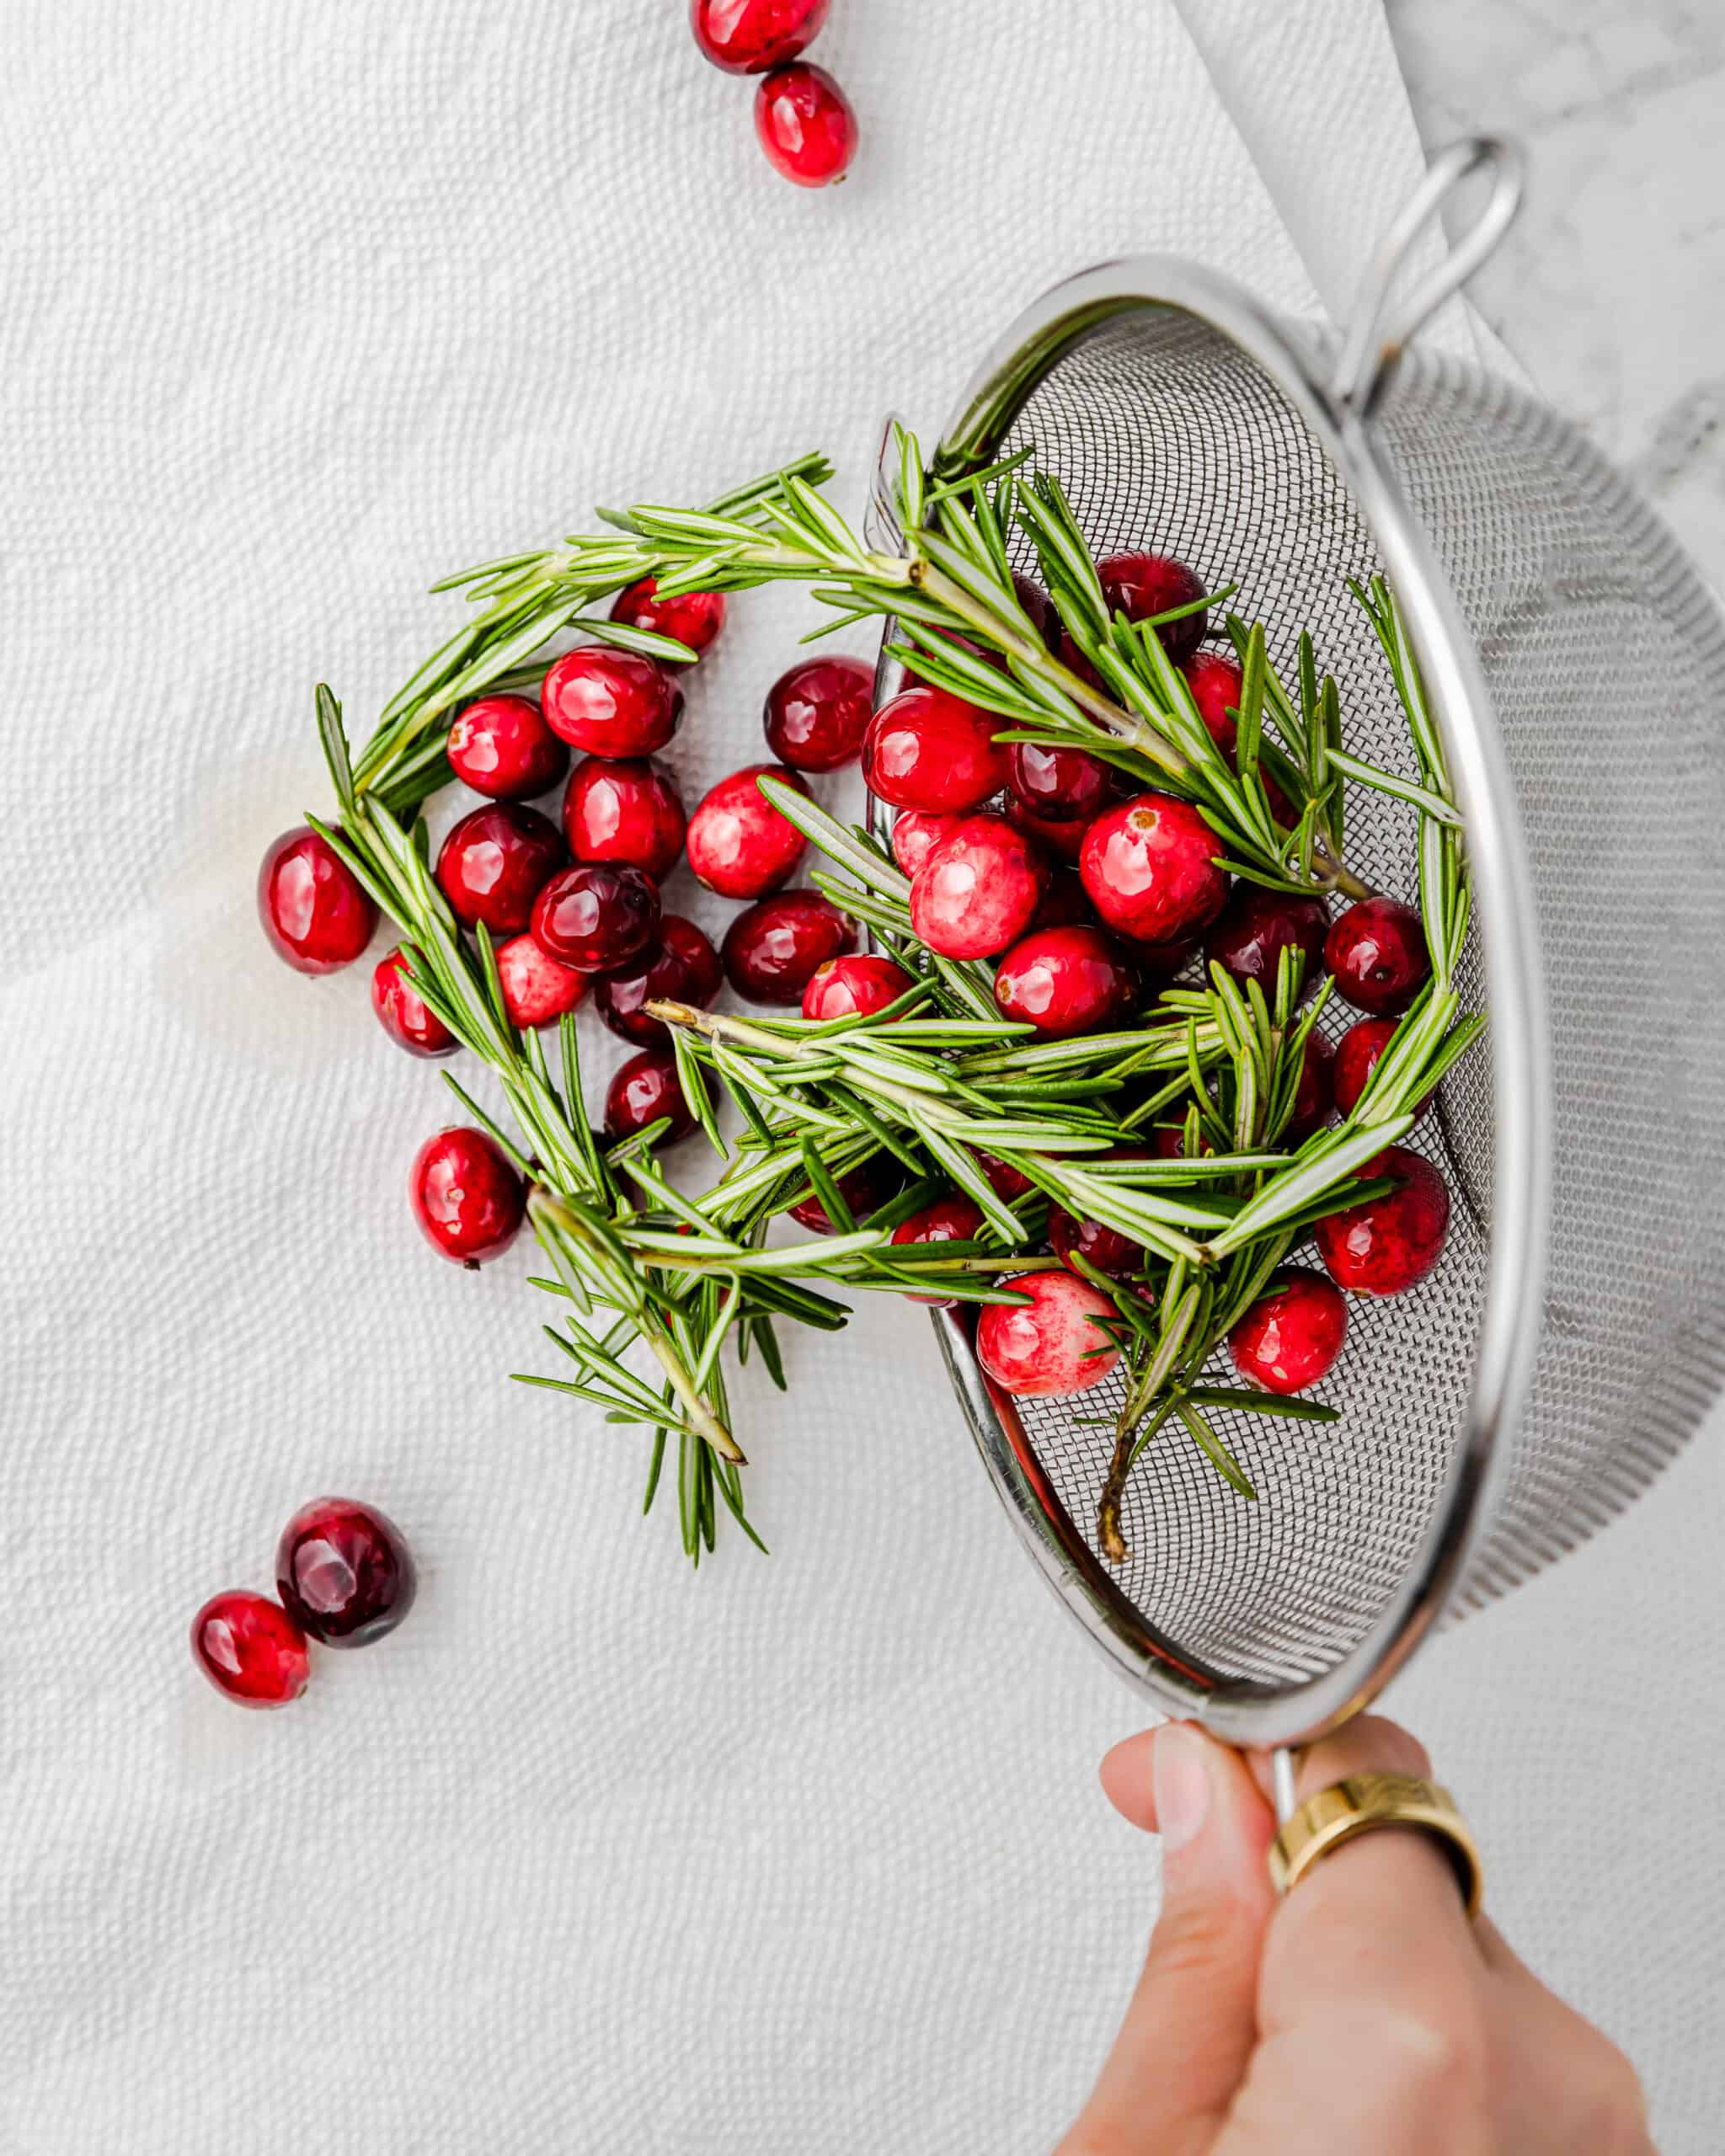 drying sugar coated cranberries and rosemary.